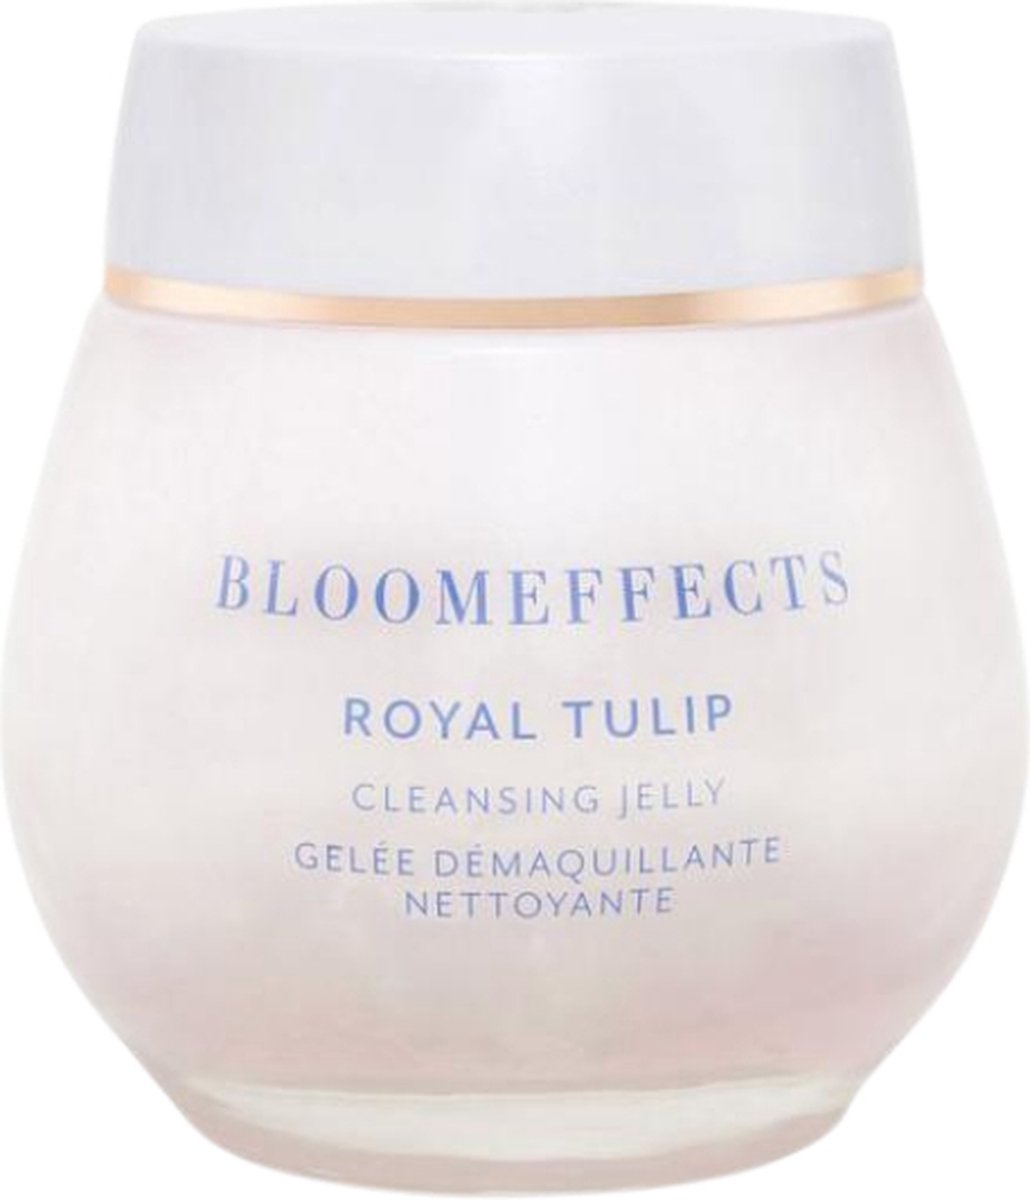 Bloomeffects - Royal Tulip Cleansing Jelly - 80 ml